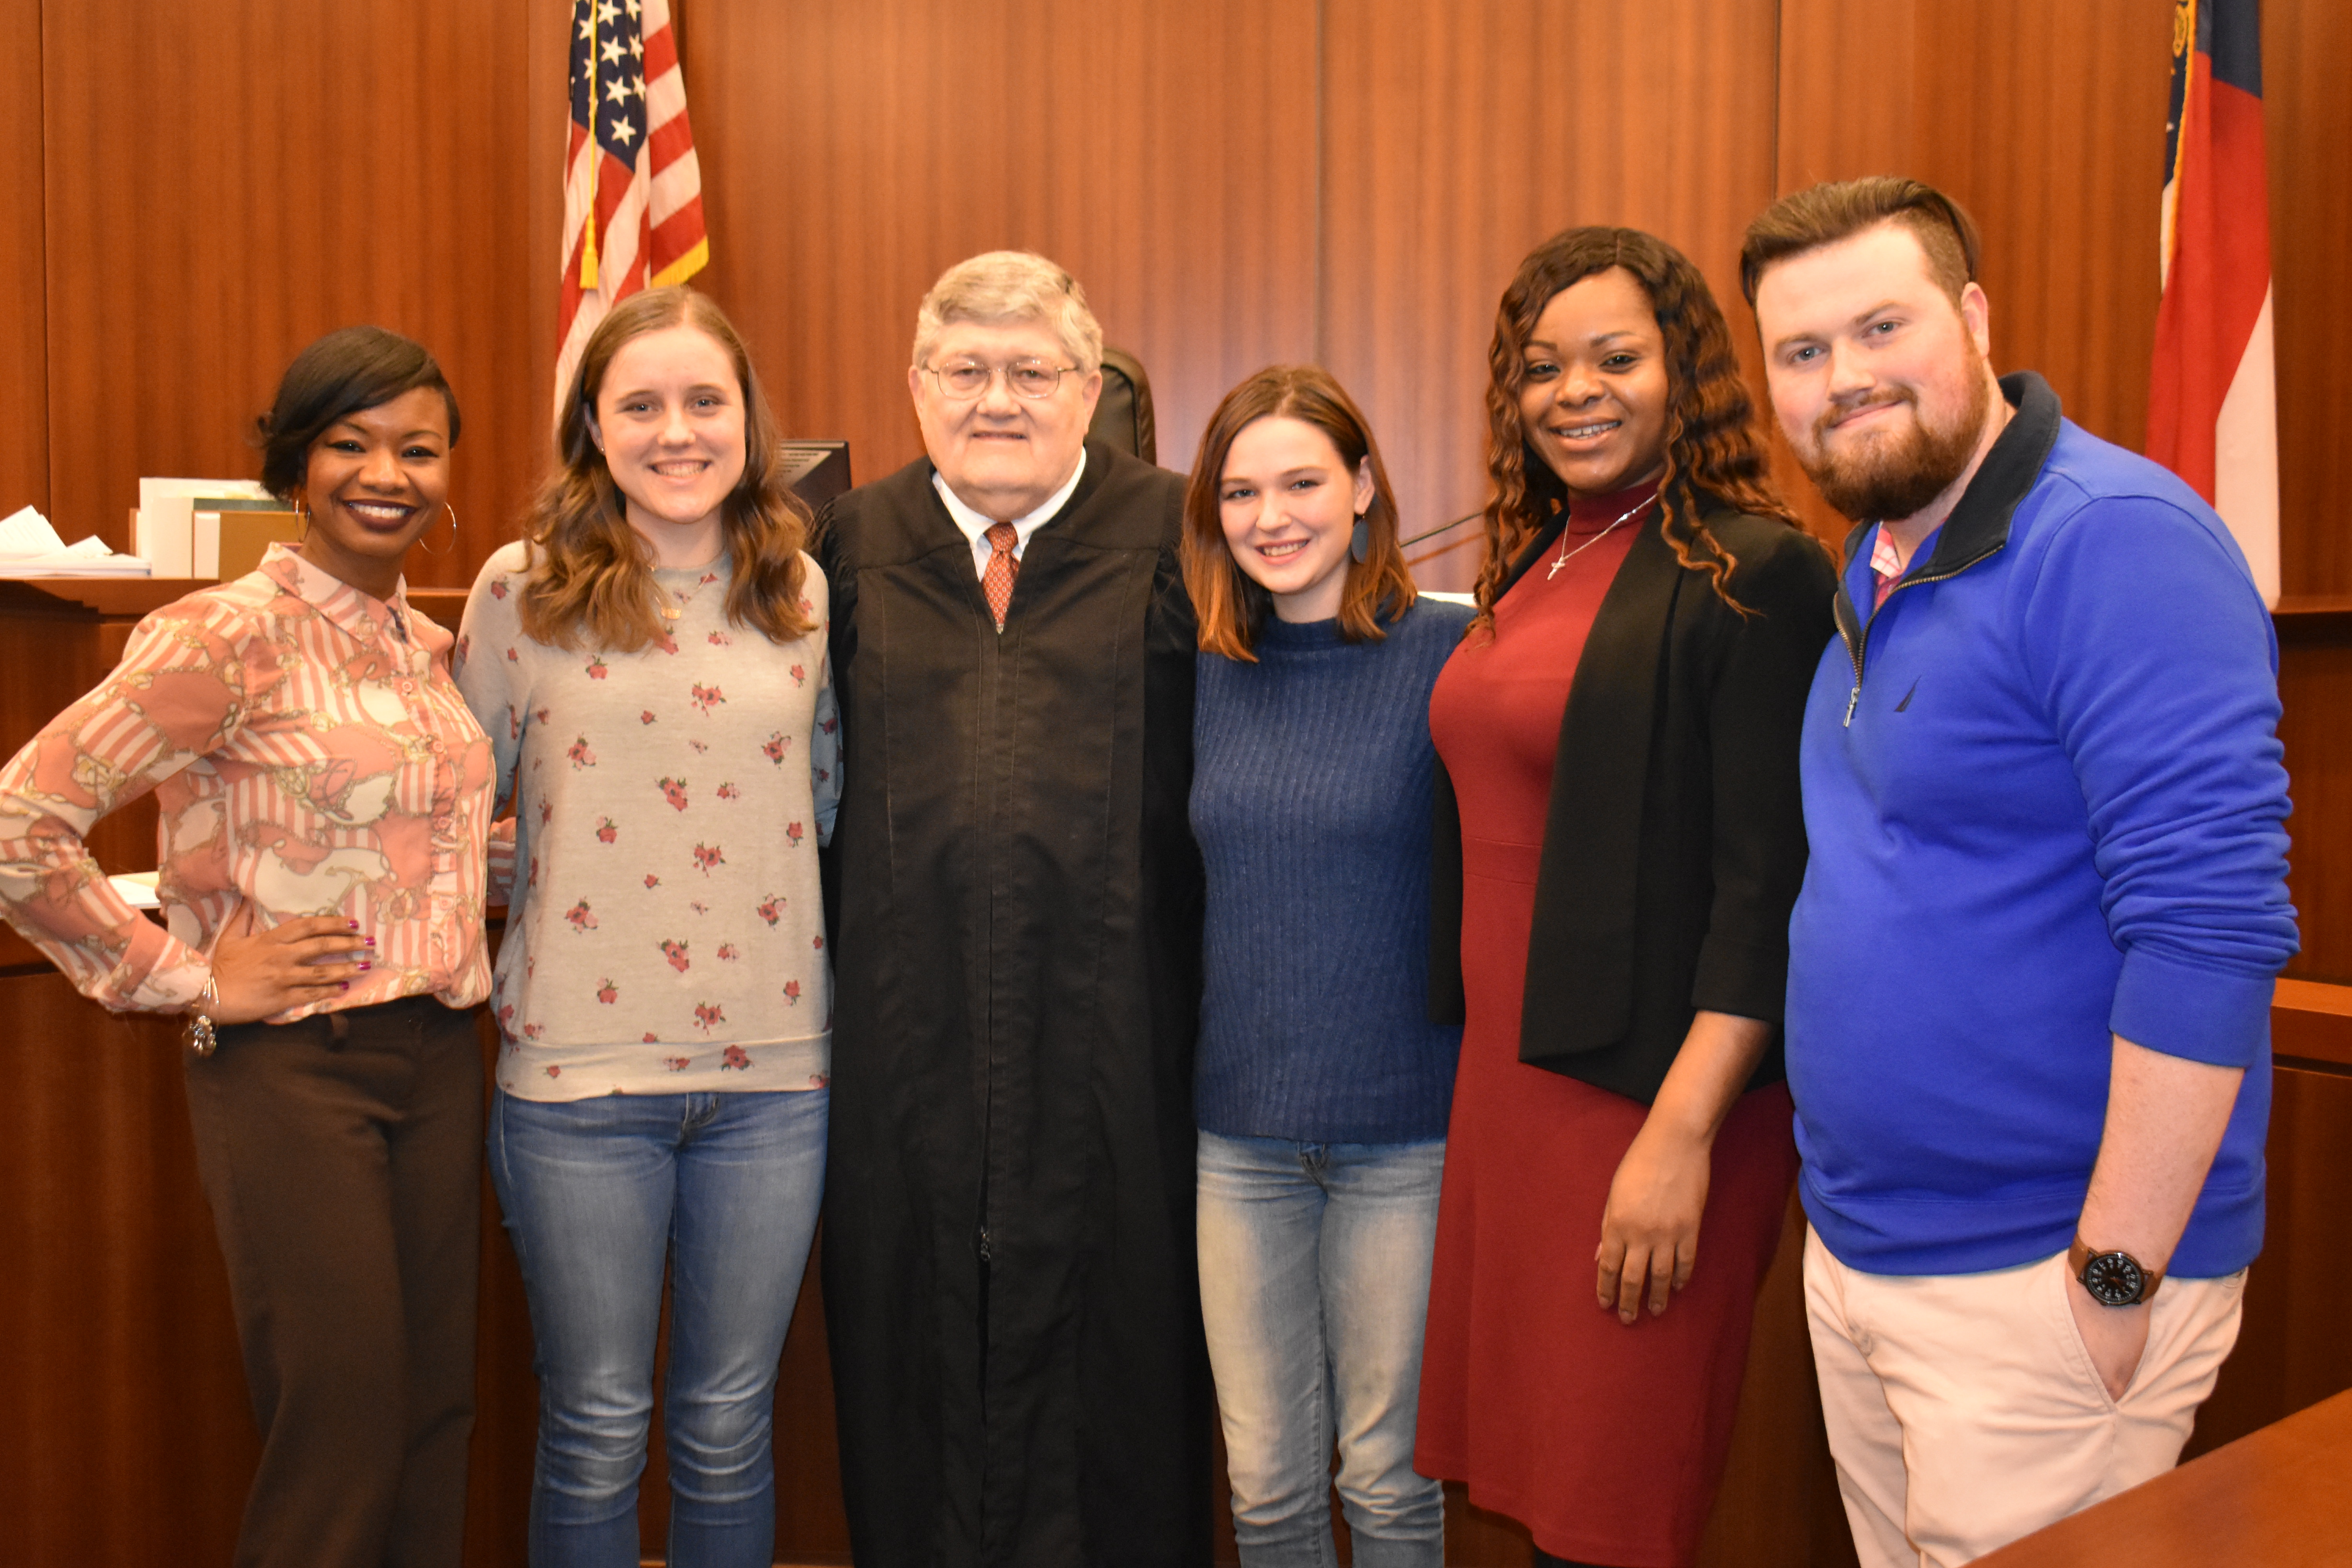 Court Coordinator Tiffany Hutchinson, LaGrange Youth Council Member Libby Criswell, Judge A. Quillian Baldwin, Jr.-presiding Judge, LaGrange Youth Council Member Emma Strickland, Case Manager LaNisha Rivers, & LaGrange Youth Council Advisory Jeremy Andrews